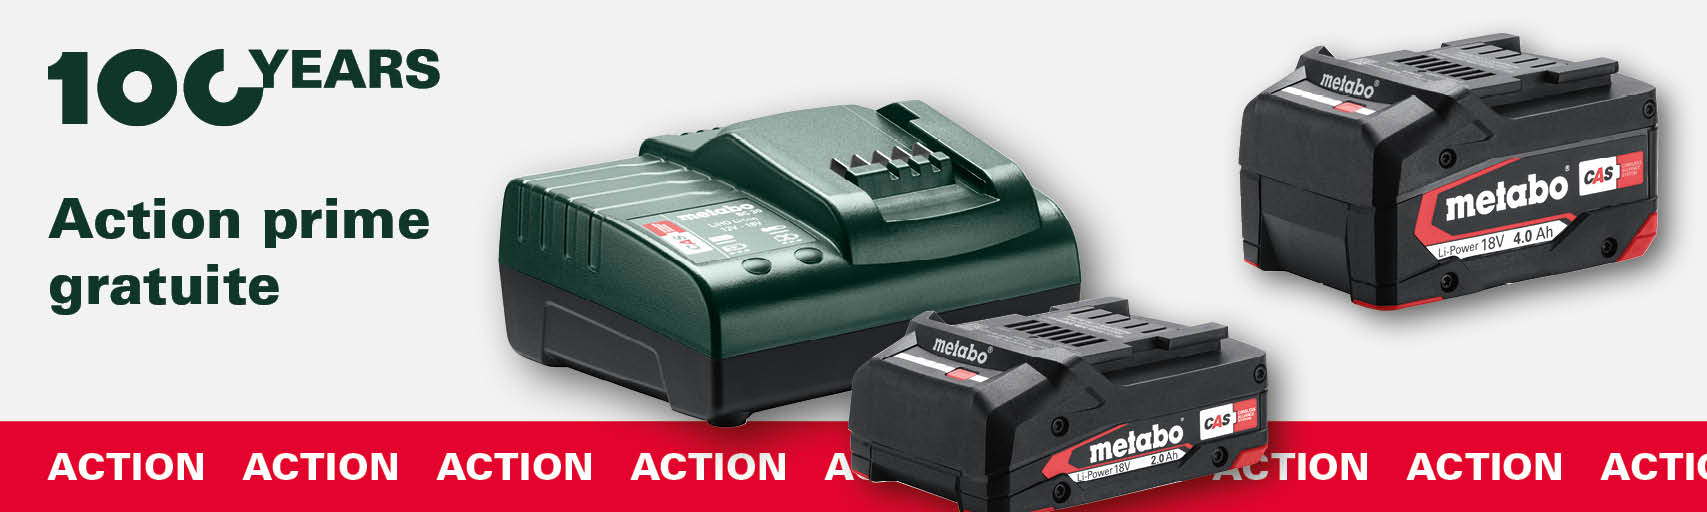 Metabo Action 100 Years | Max Urech AG